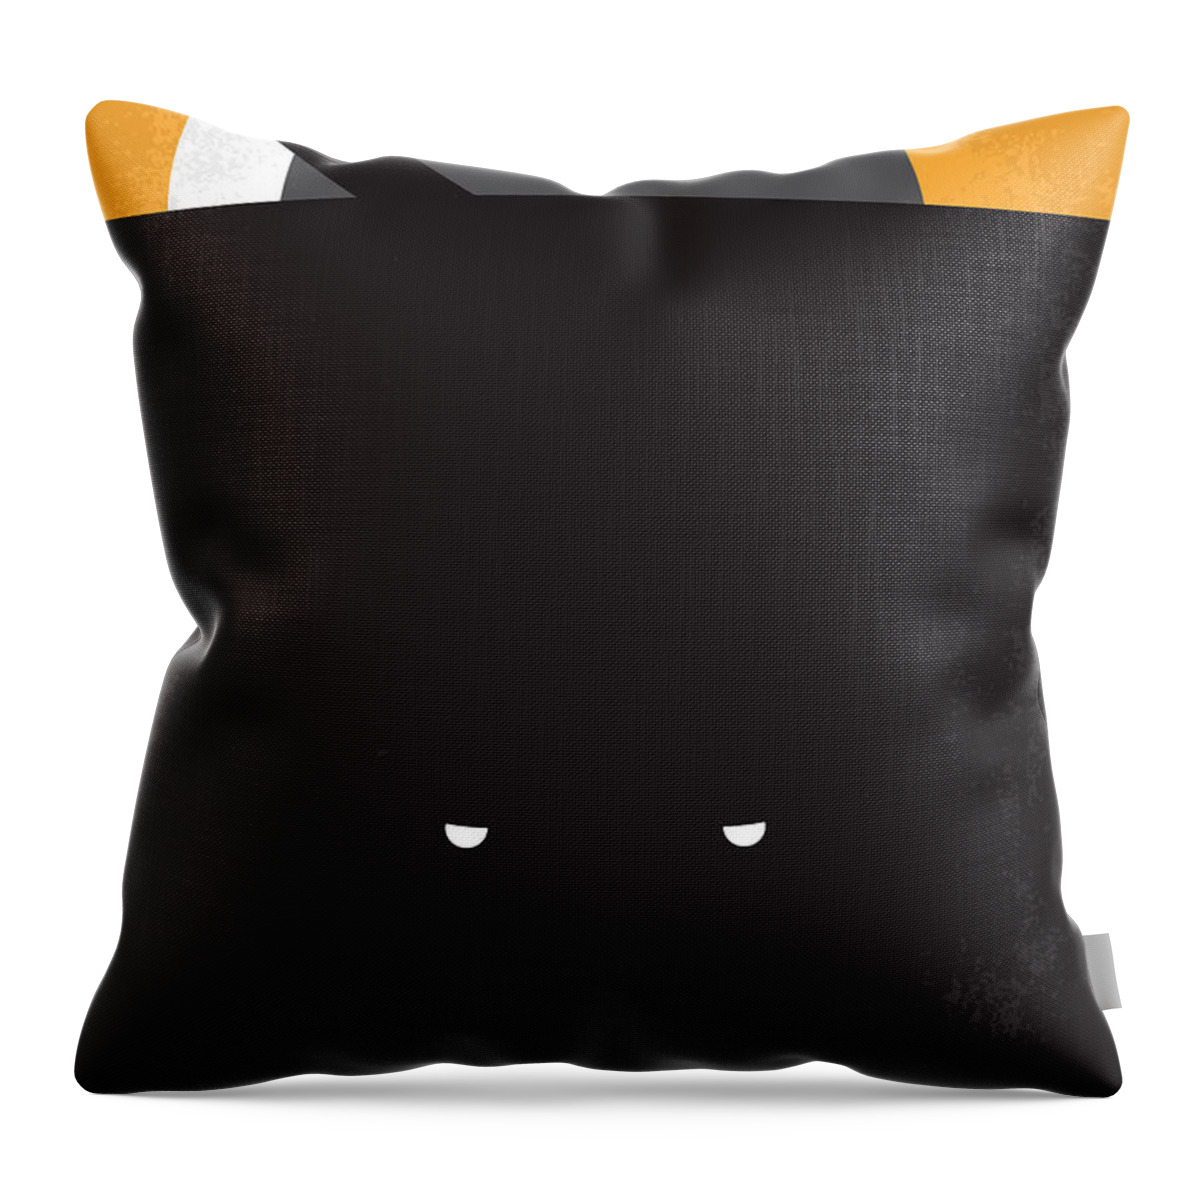 Pitch Black Throw Pillow featuring the digital art No409 My Pitch Black minimal movie poster by Chungkong Art